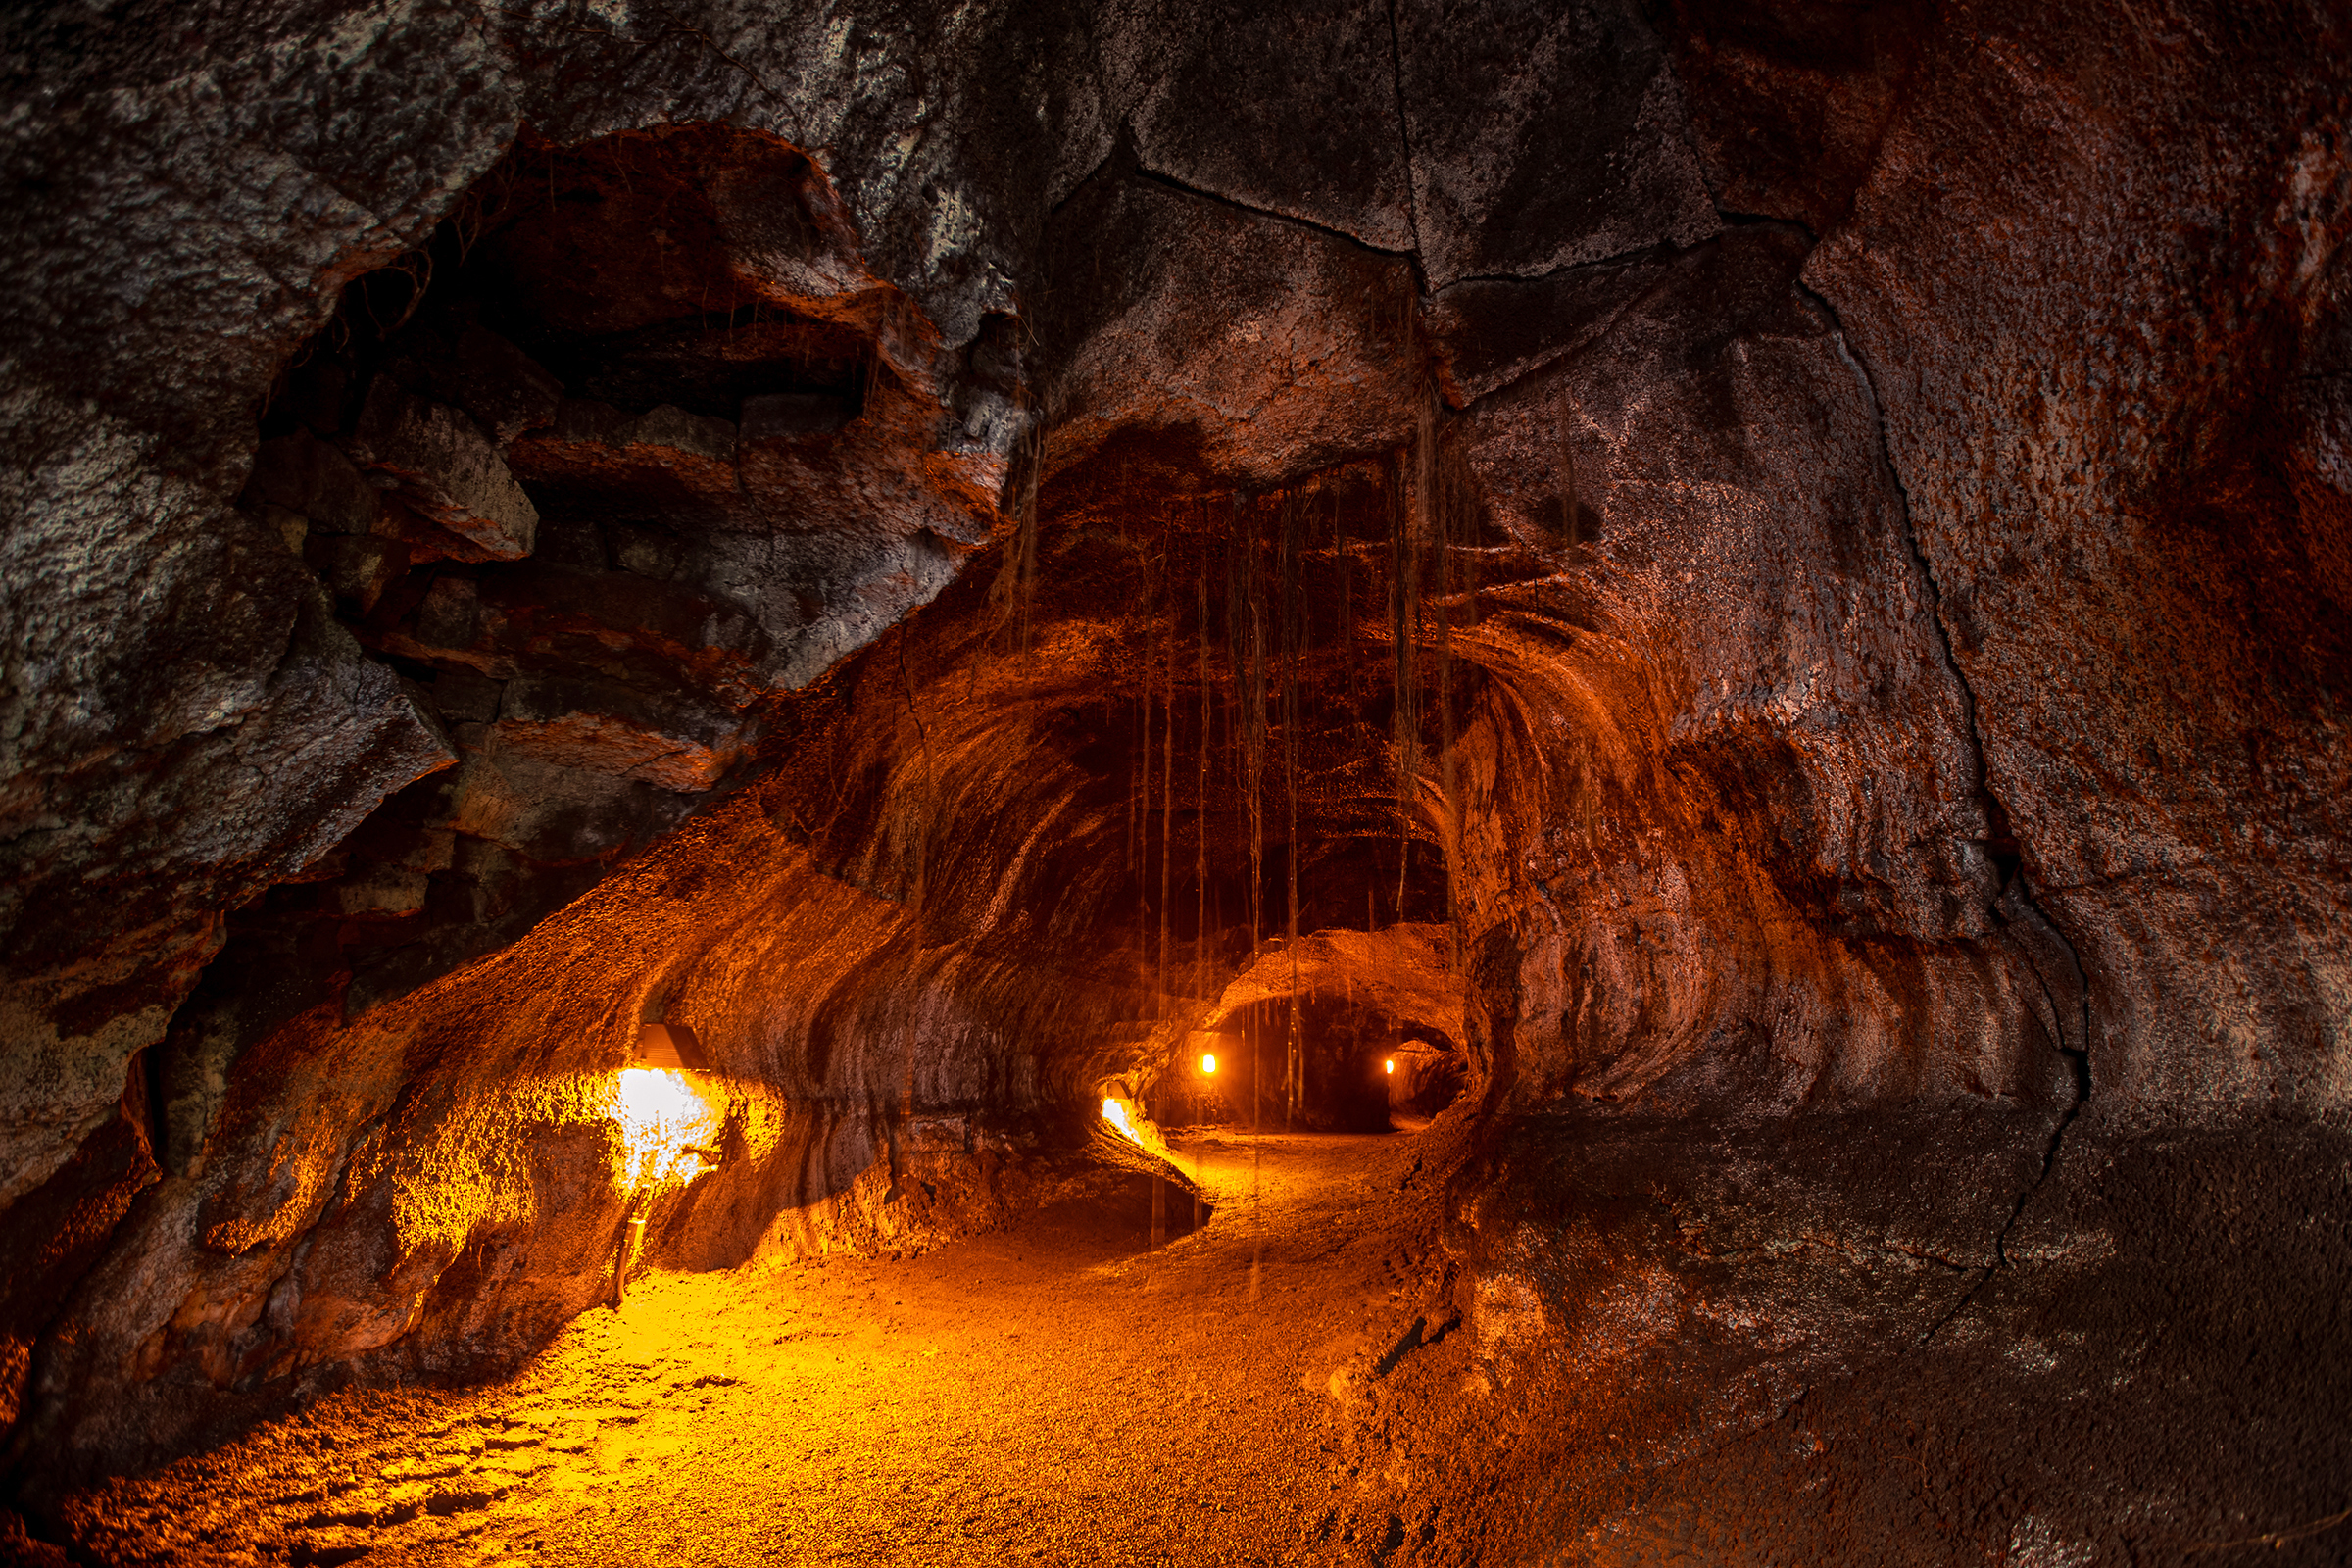 A dimly lit lava tube with aerial roots hanging from the ceiling. 